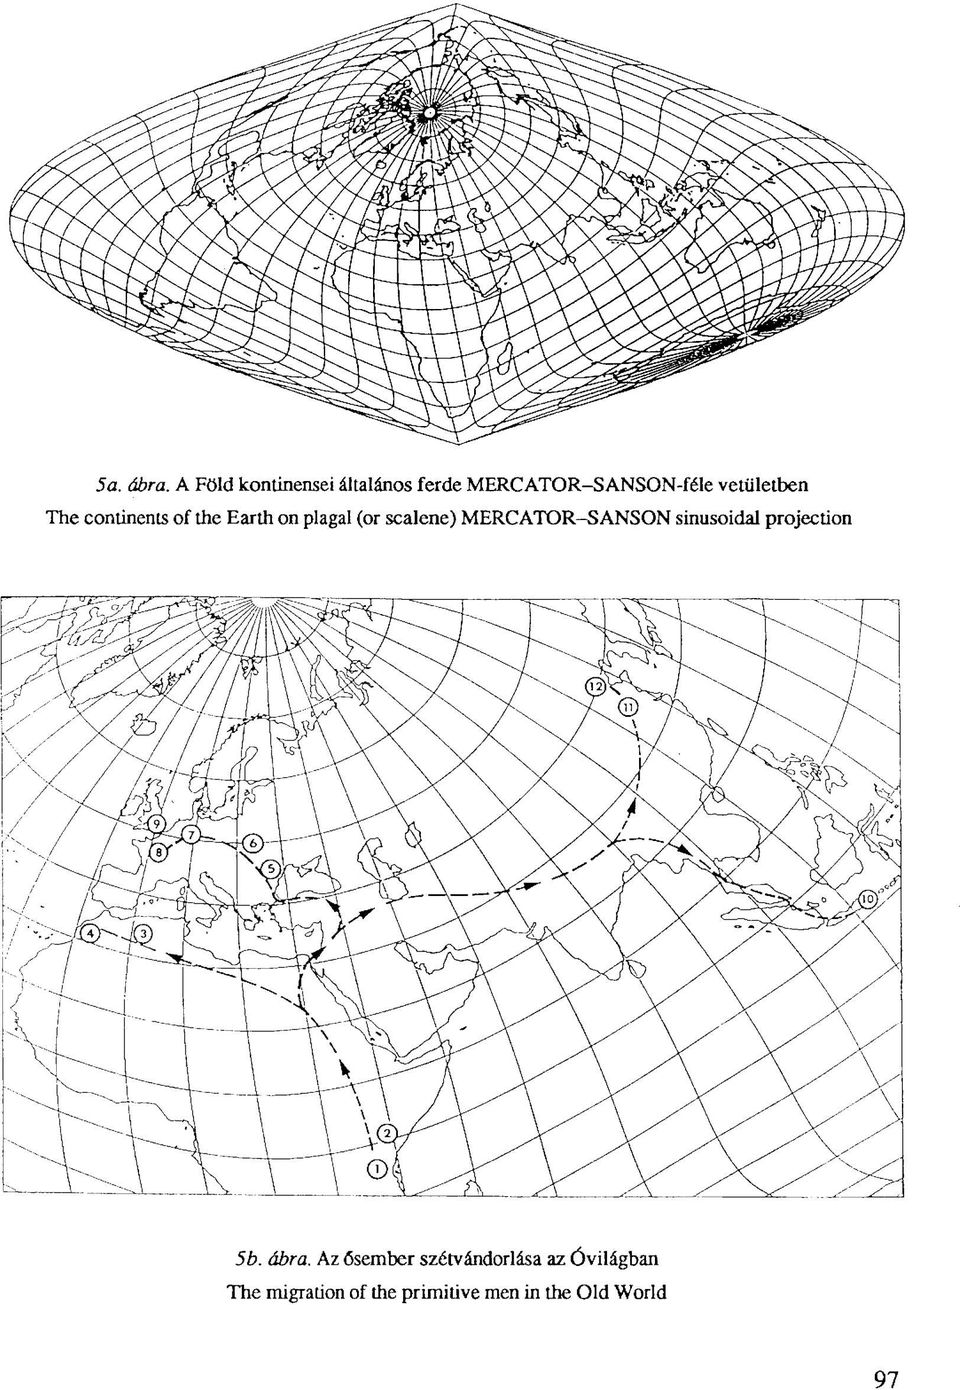 The continents of the Earth on plagal (or scalene) MERCATOR-SANSON